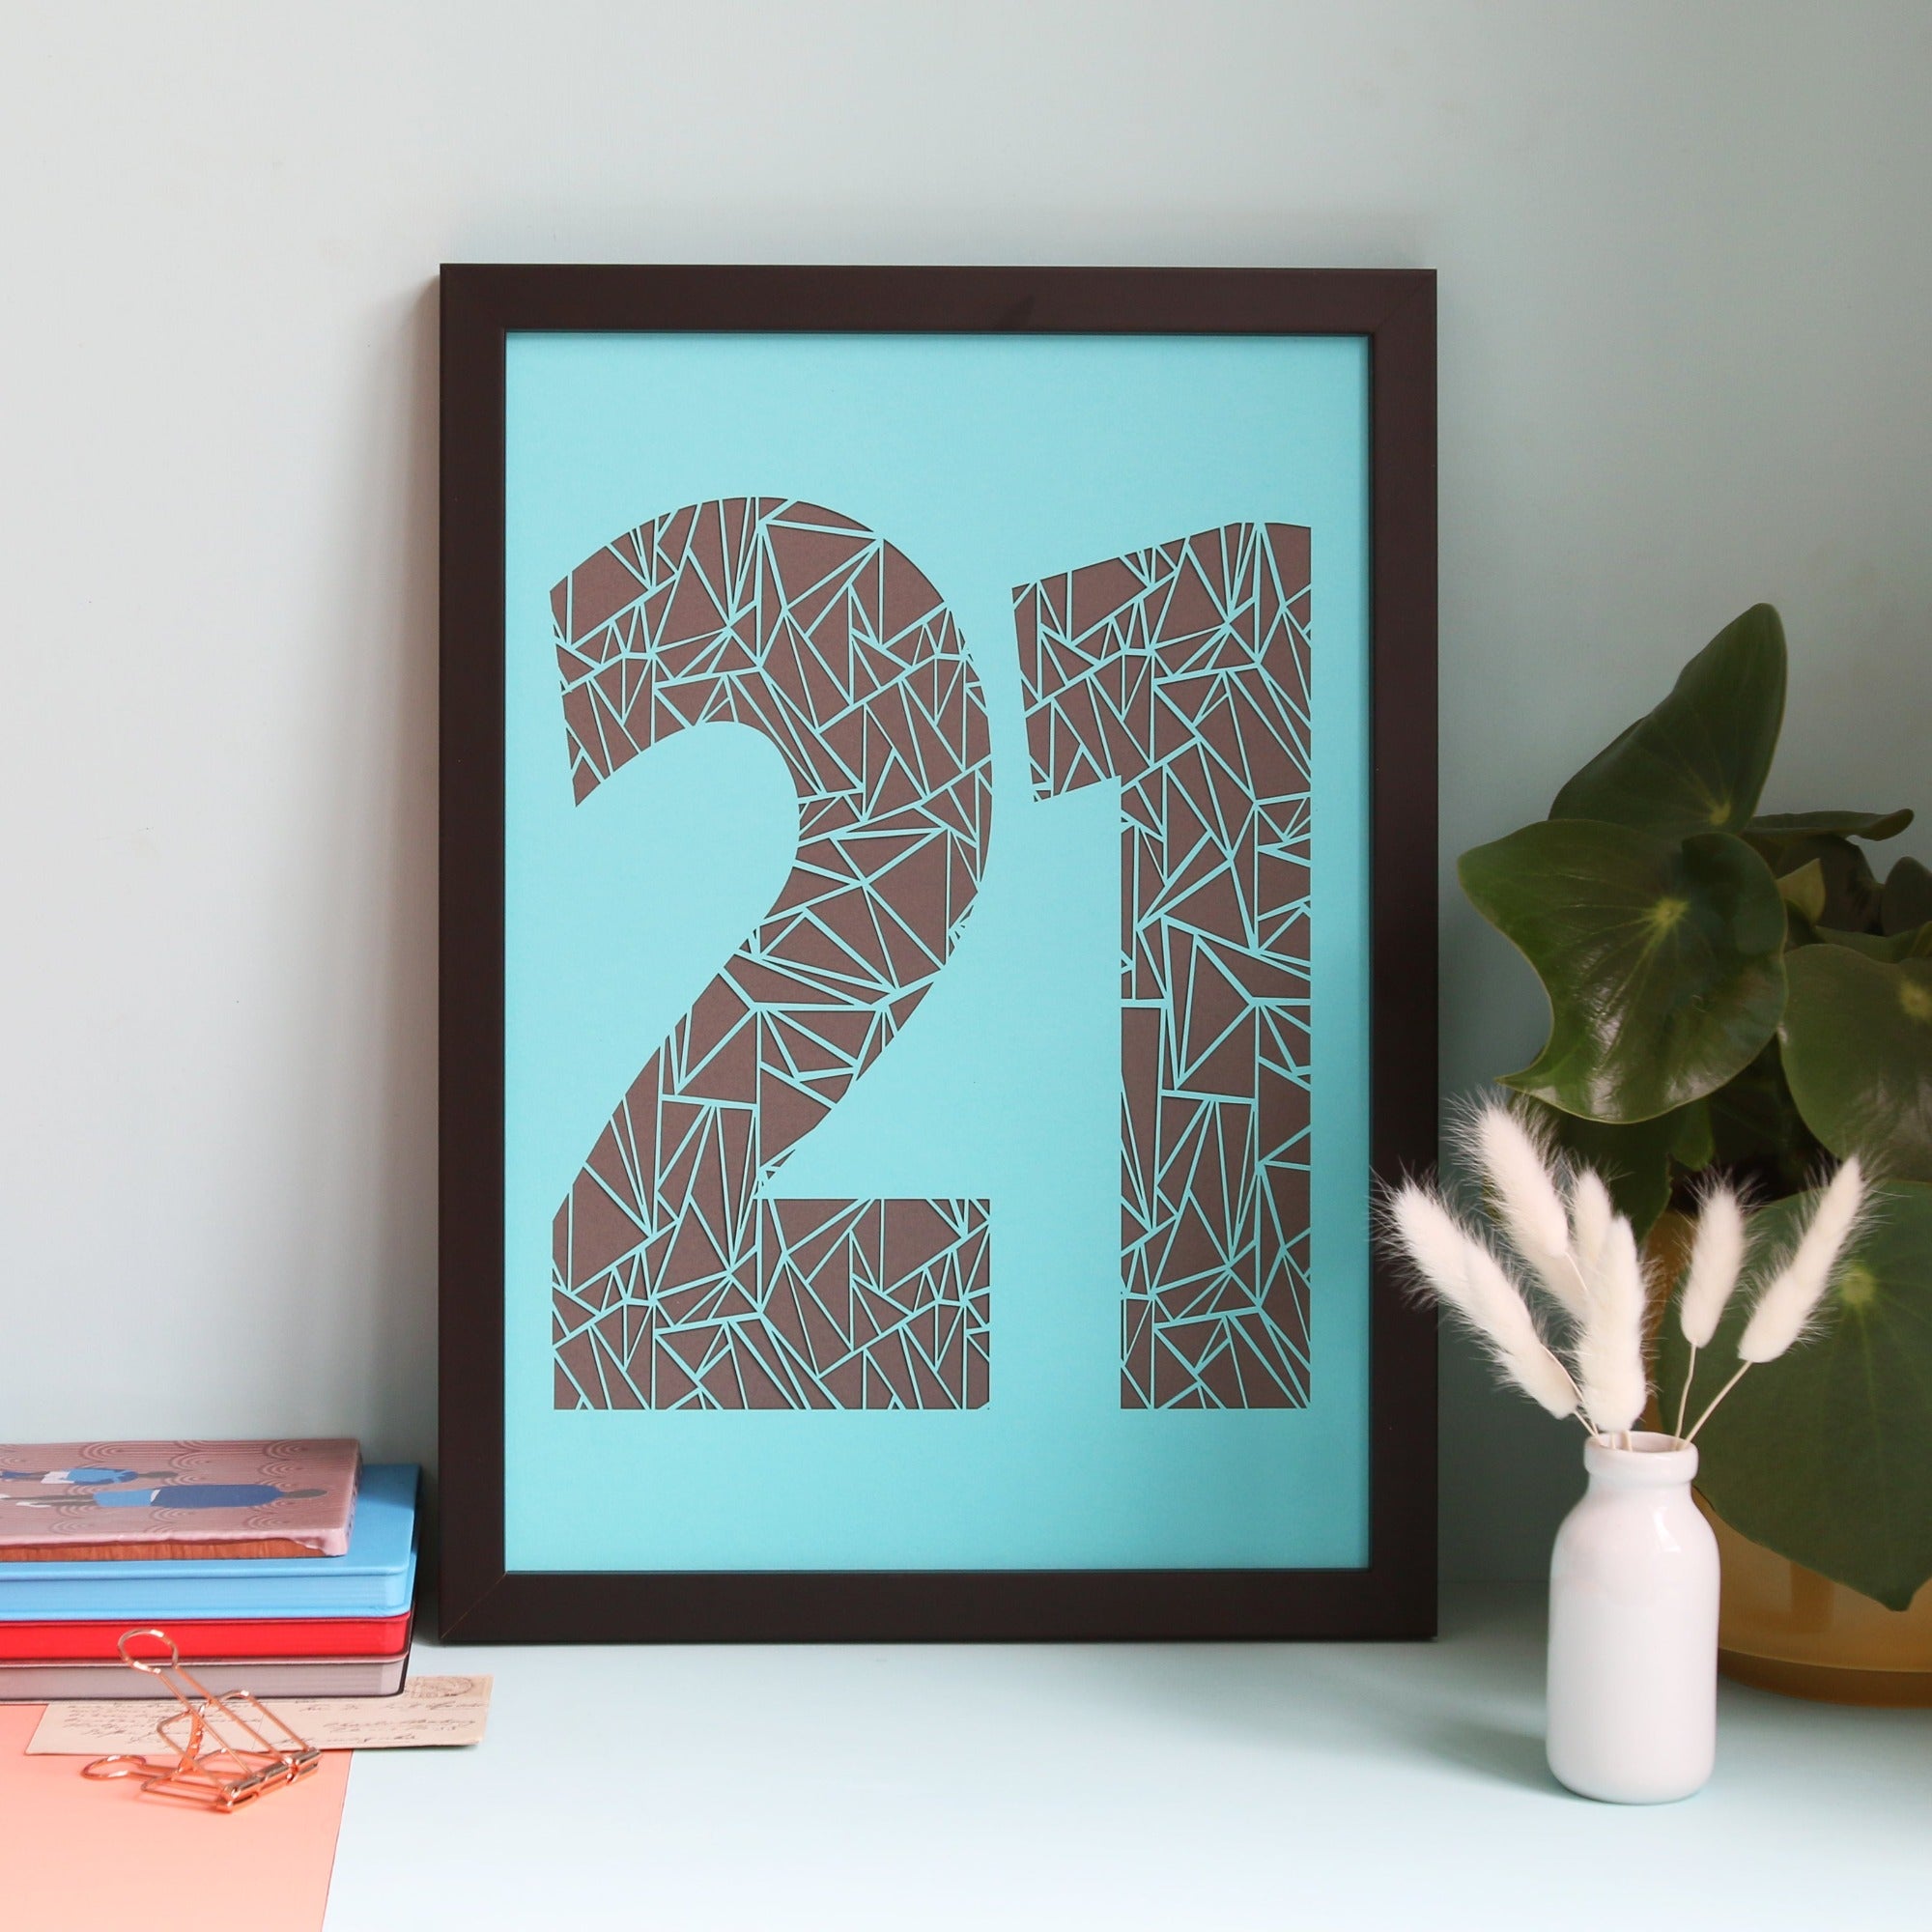 Number 21 framed geometric papercut in turquoise and brown colourway